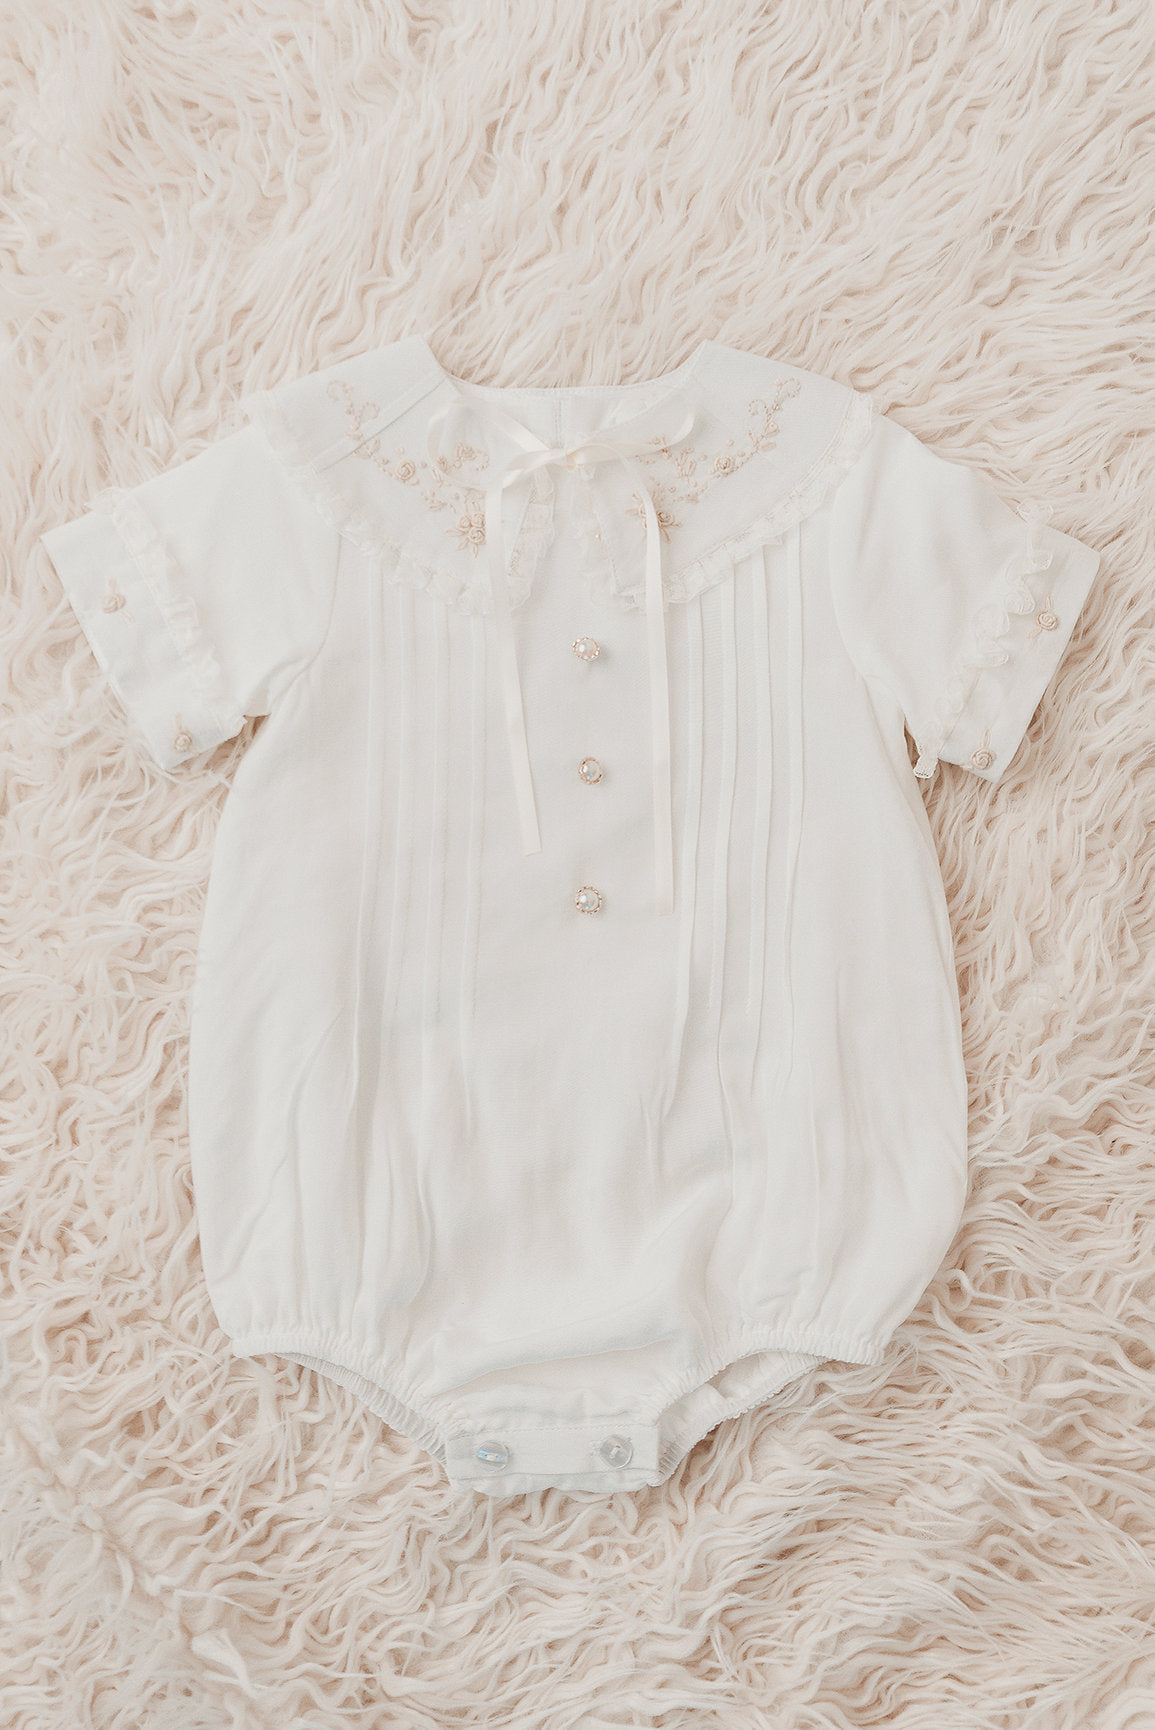 heirloom outfit for infant girls